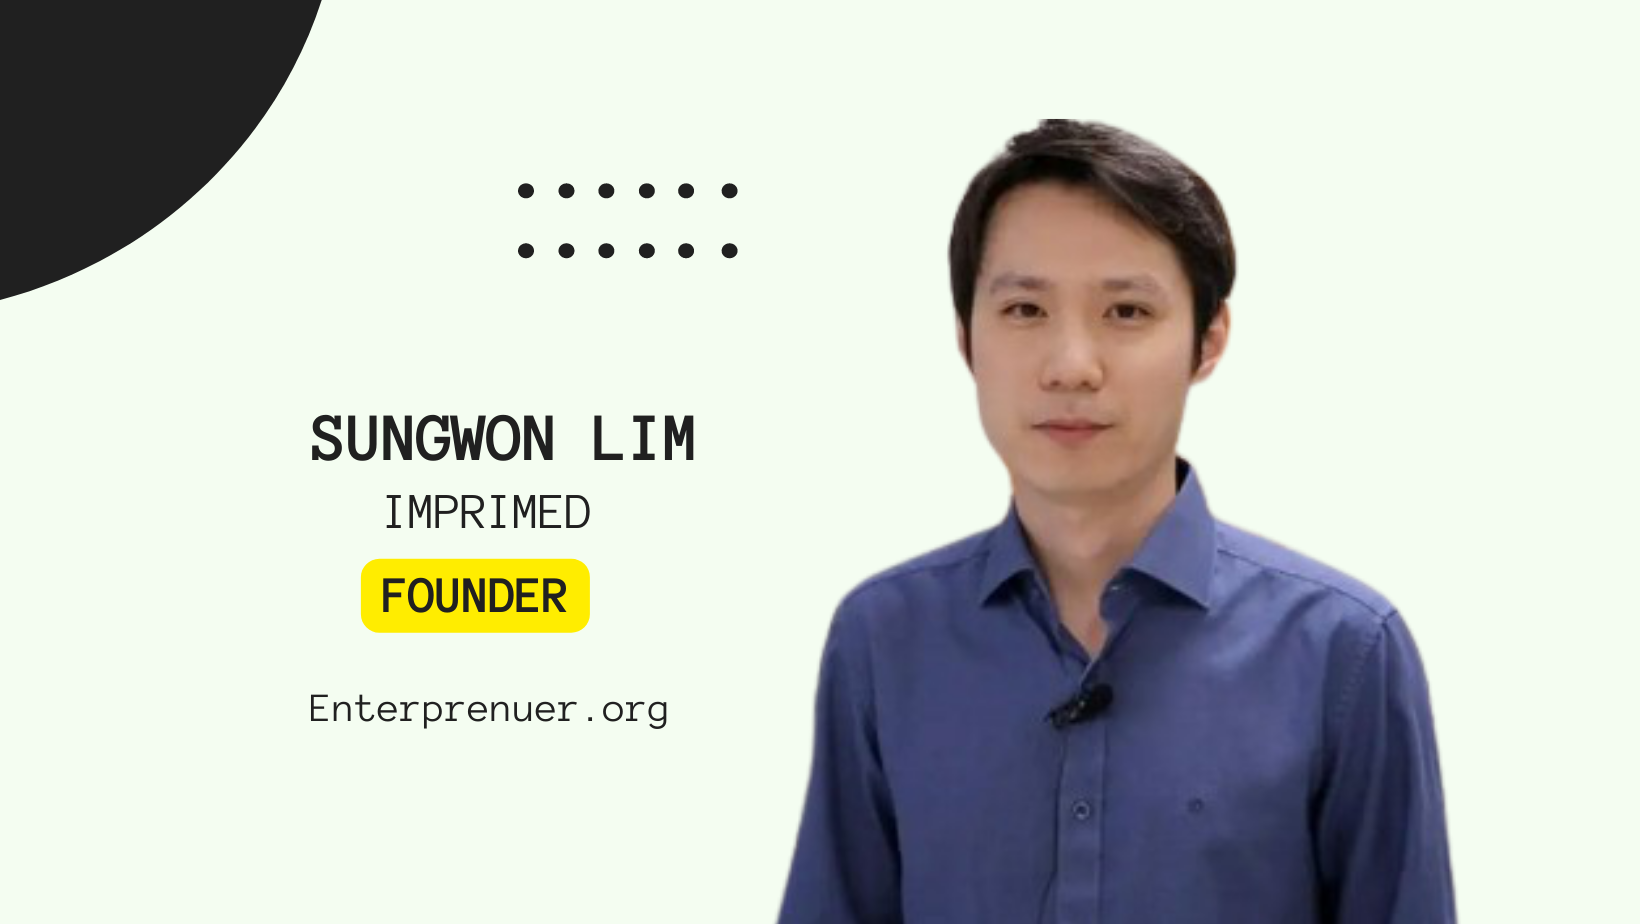 Sungwon Lim Co-Founder of ImpriMed